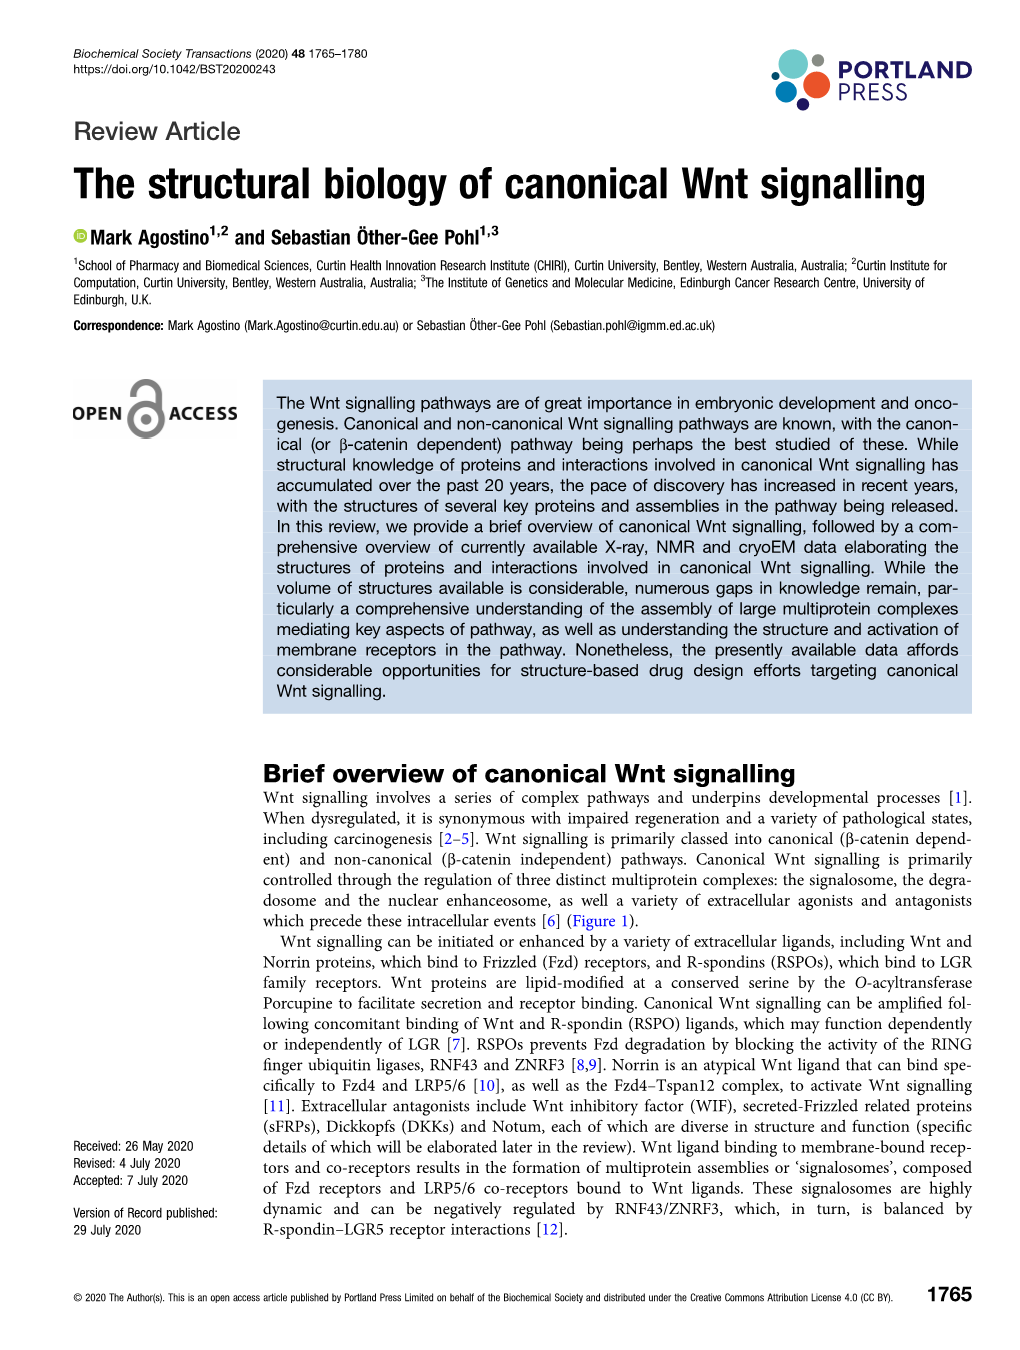 The Structural Biology of Canonical Wnt Signalling